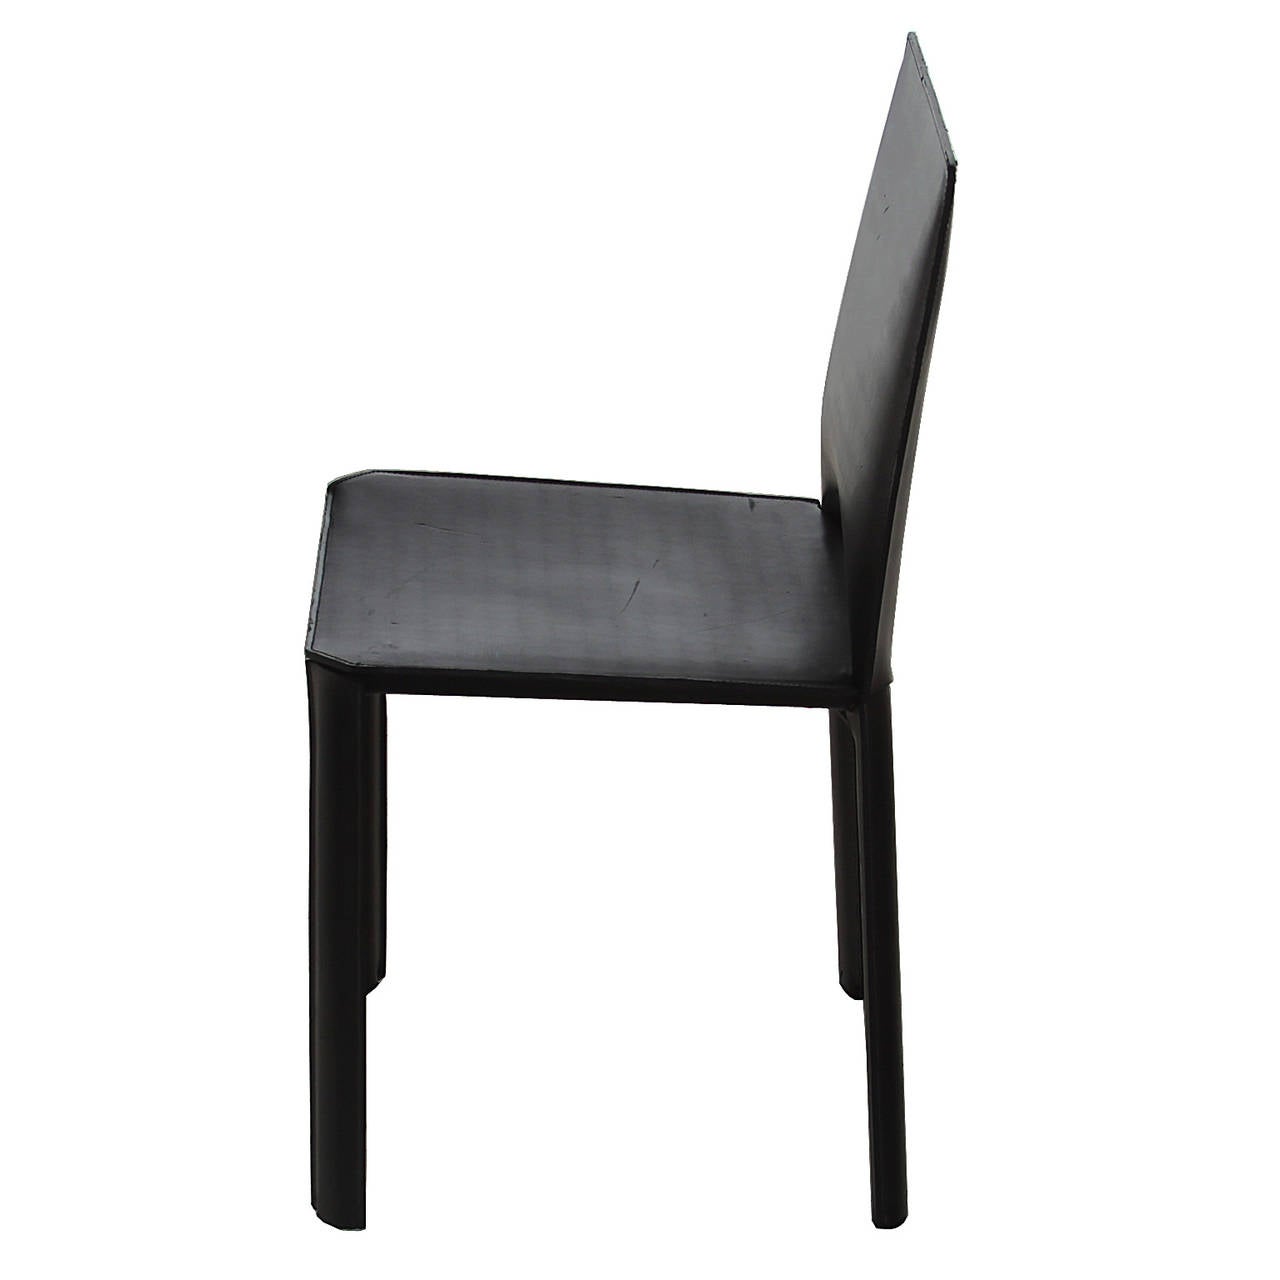 A beautiful single chair from Brazil. The chair is very simply designed and has an elegant look. These chairs are steel frames wrapped in a belt thickness black leather. Leather has been burnished and restored but chair retain original age and